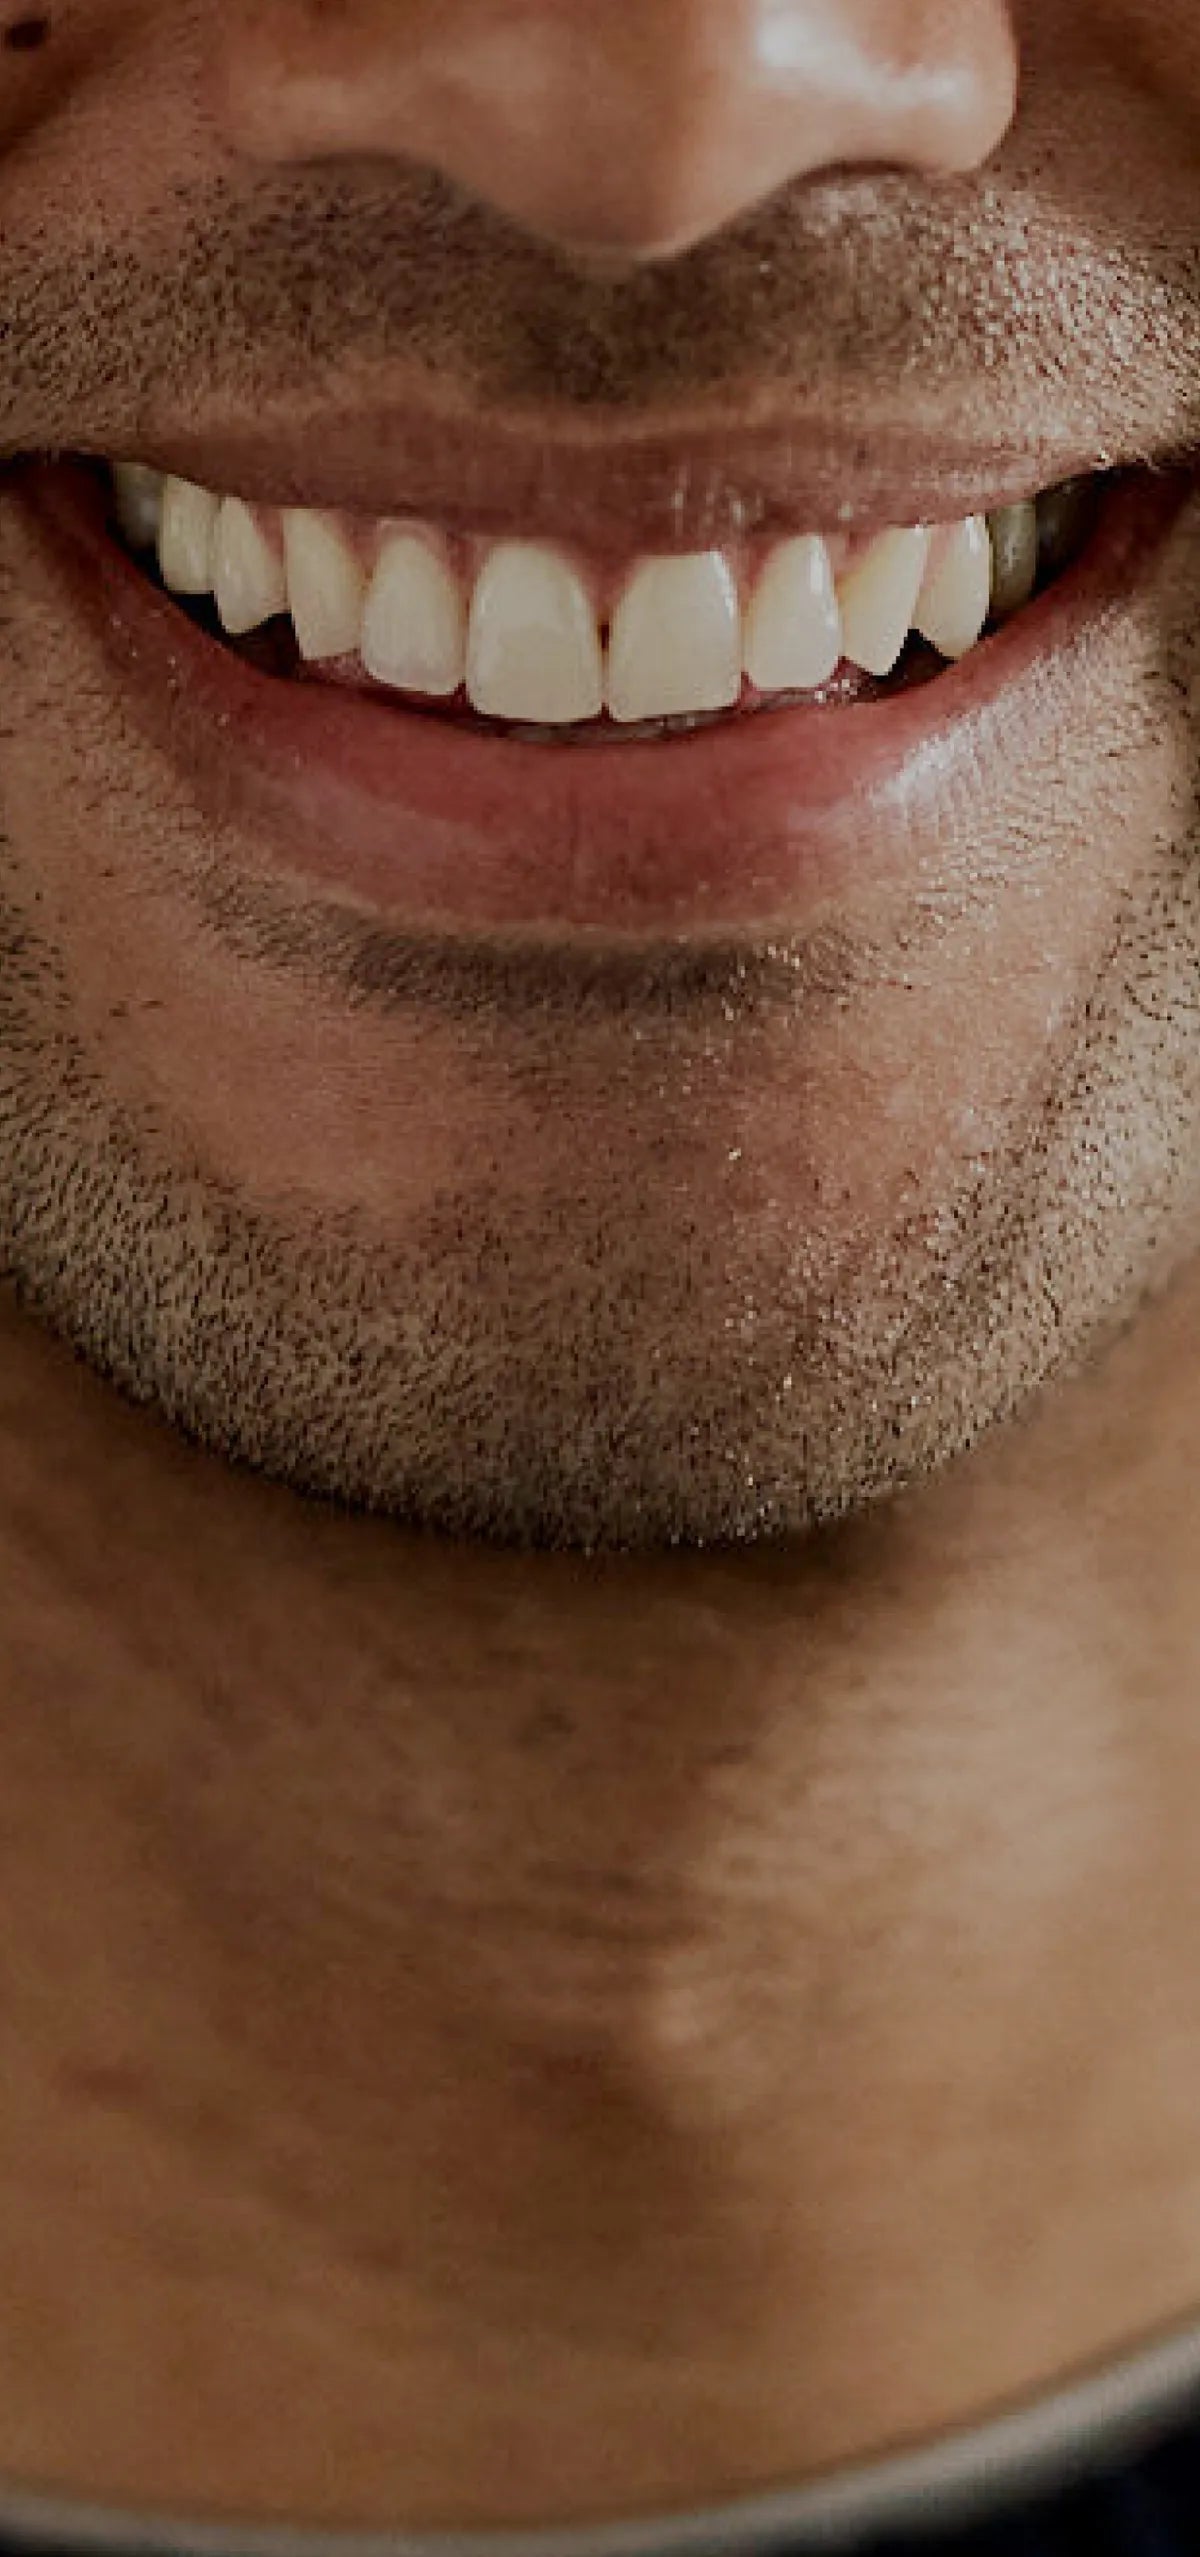 Photo of a man smiling with a close of up of his teeth